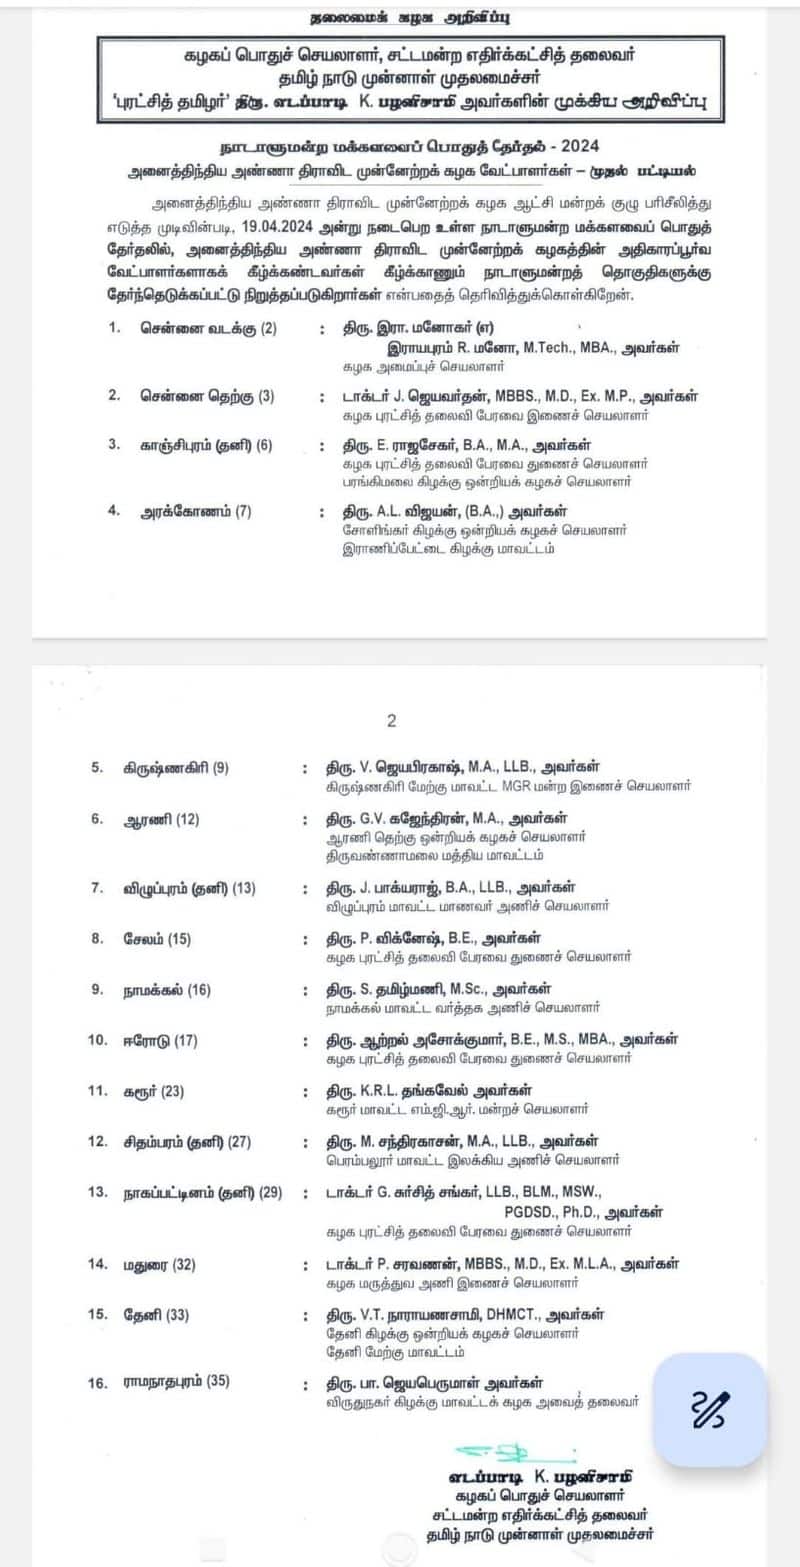 Release of first phase list of candidates to contest on behalf of AIADMK kak